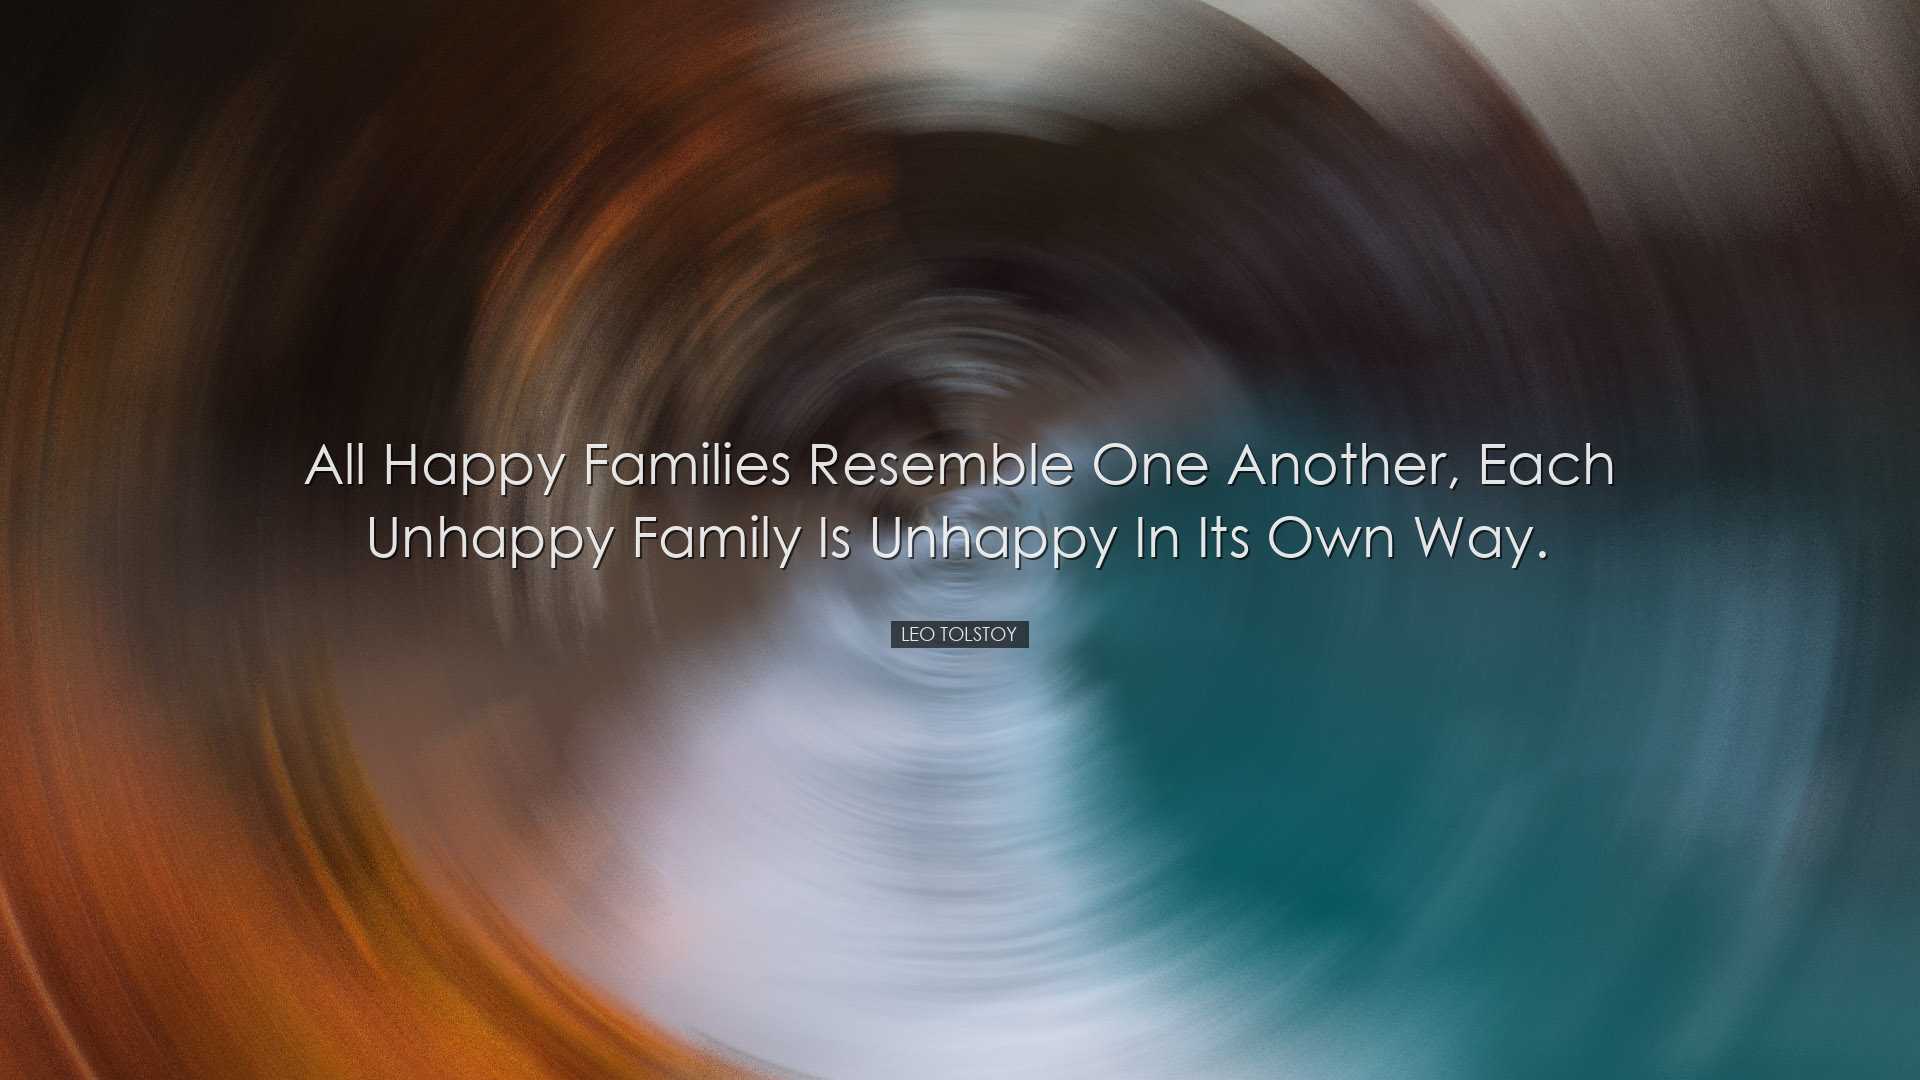 All happy families resemble one another, each unhappy family is un